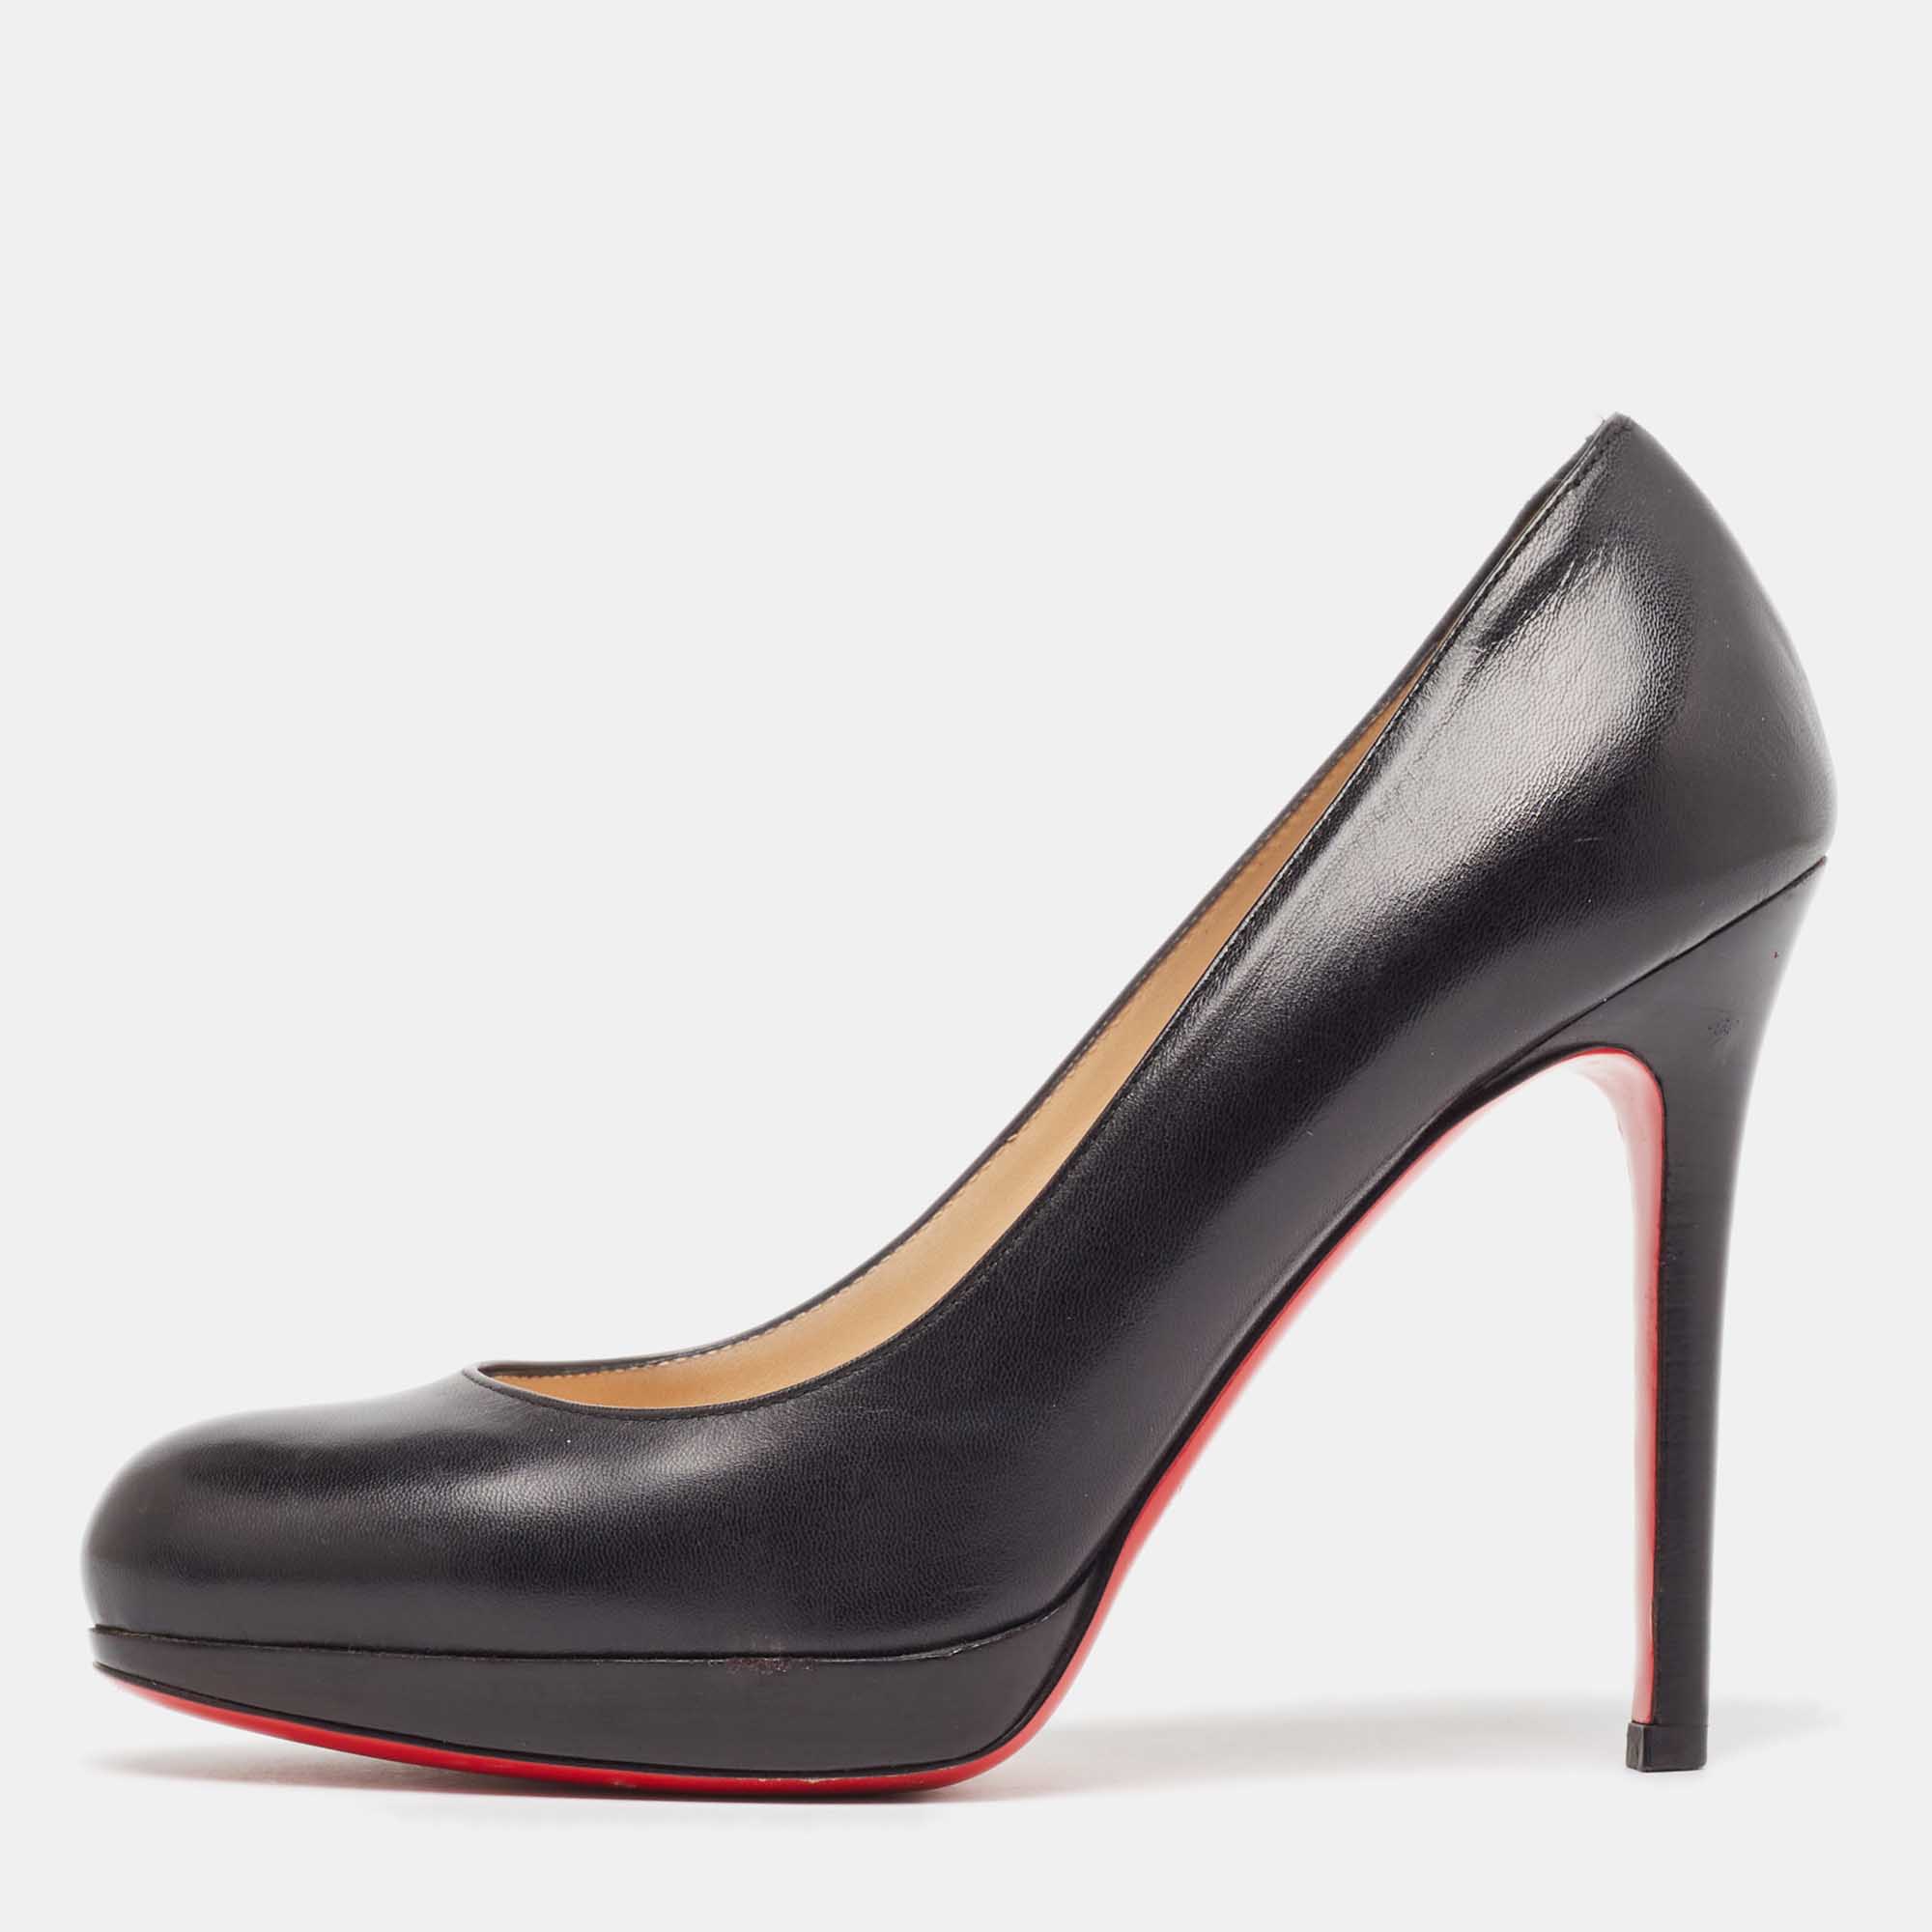 Christian louboutin black leather new simple pumps size 35.5